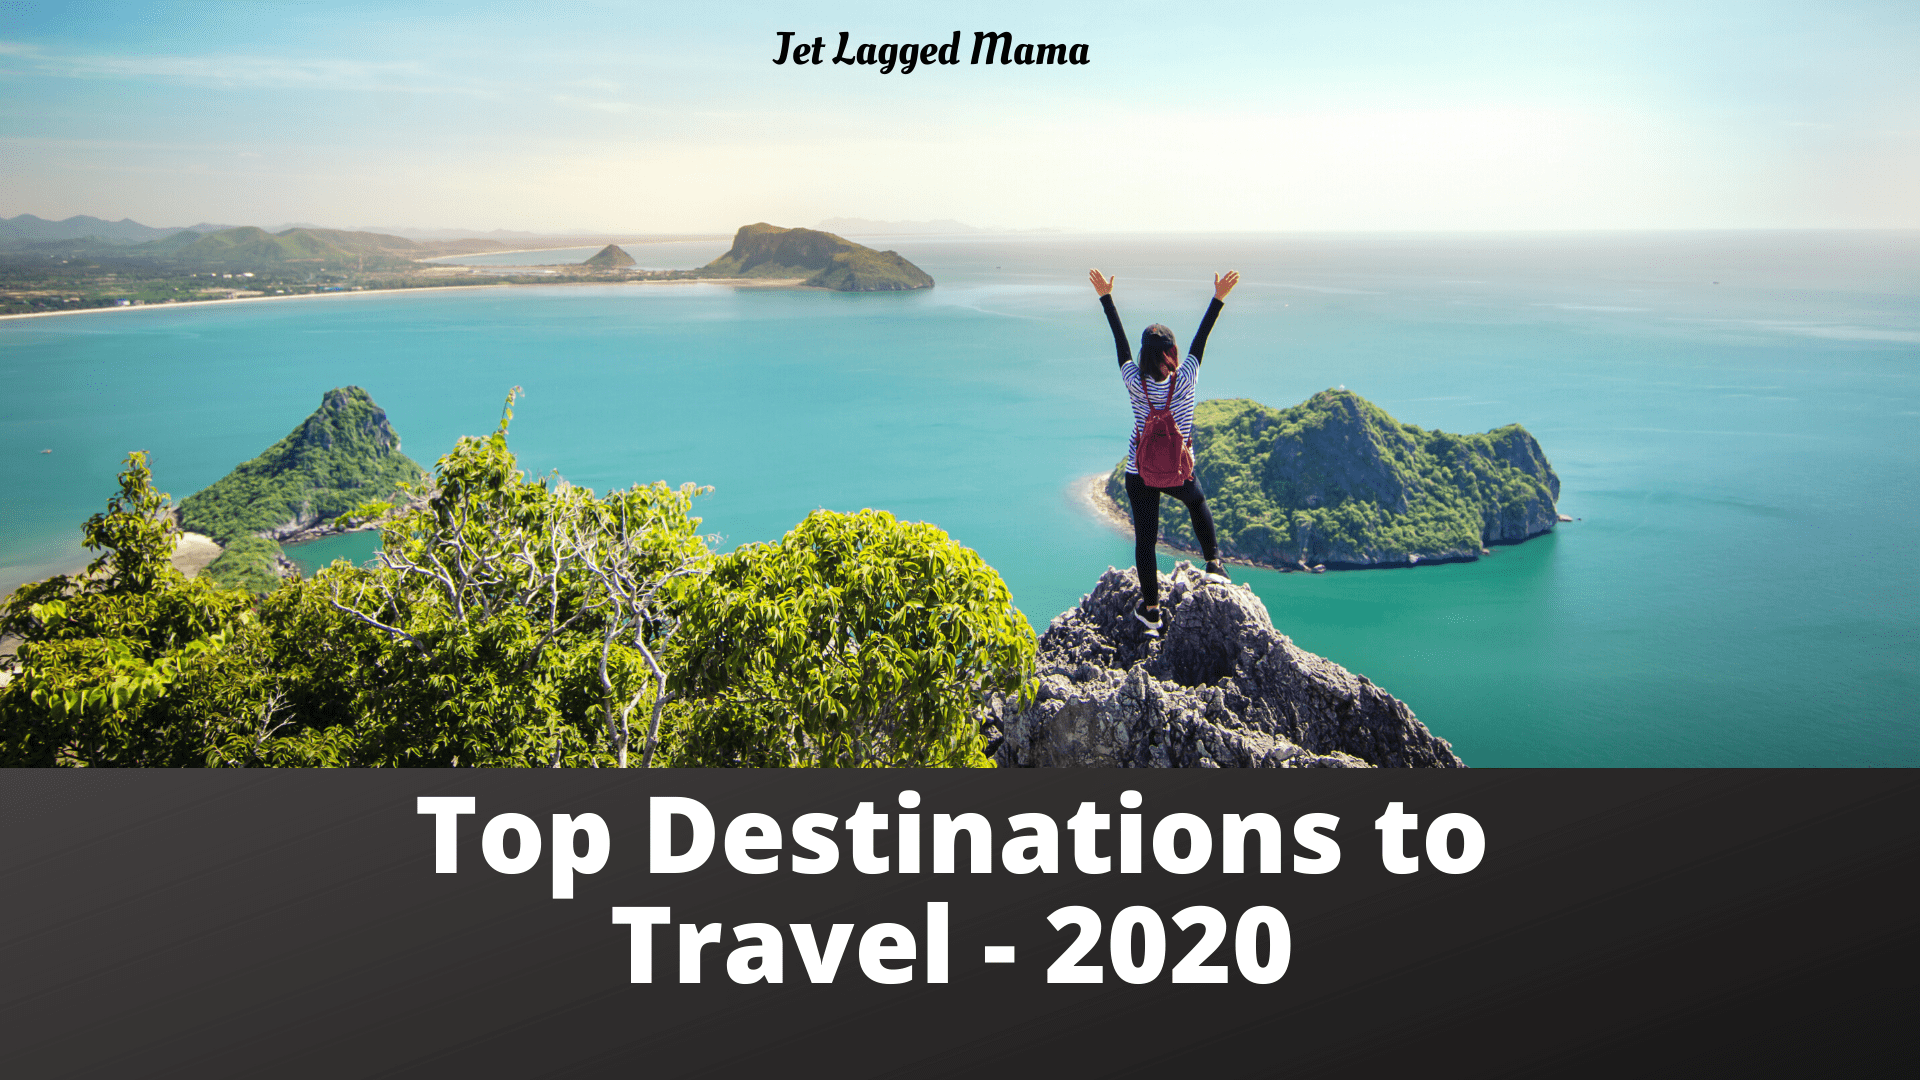 Top destinations to travel to in 2020